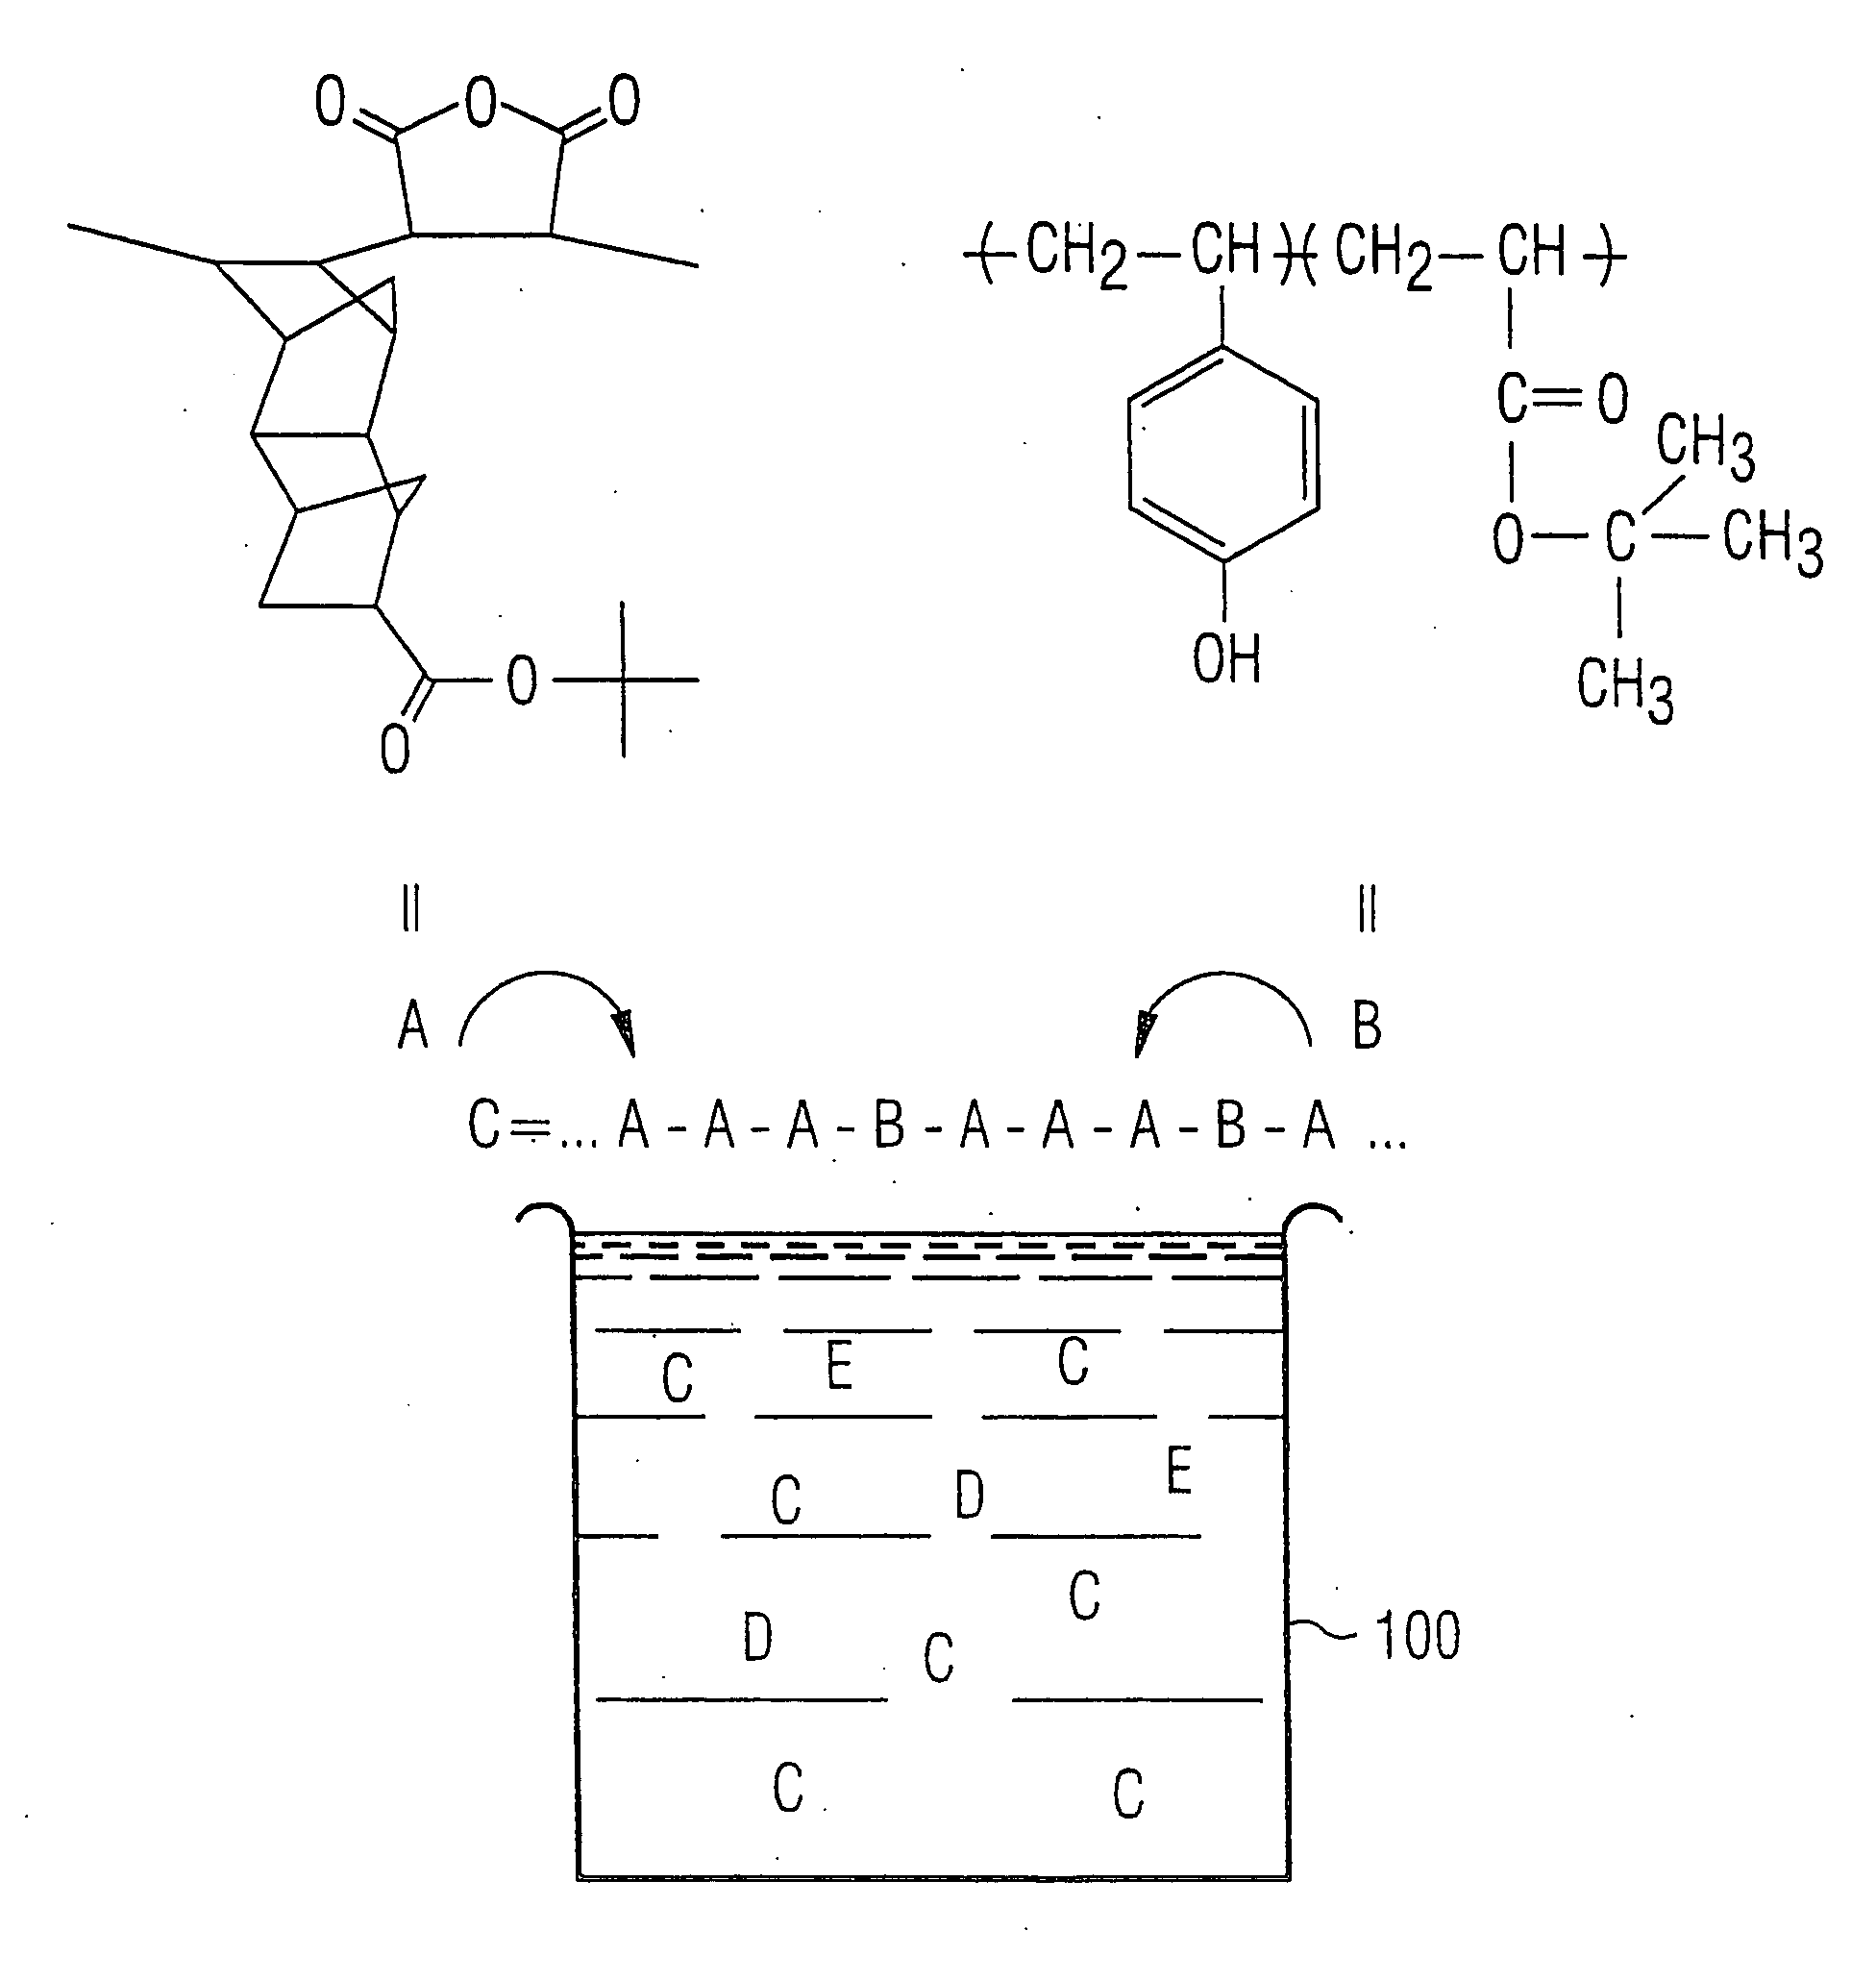 Photosensitive lacquer for providing a coating on a semiconductor substrate or a mask